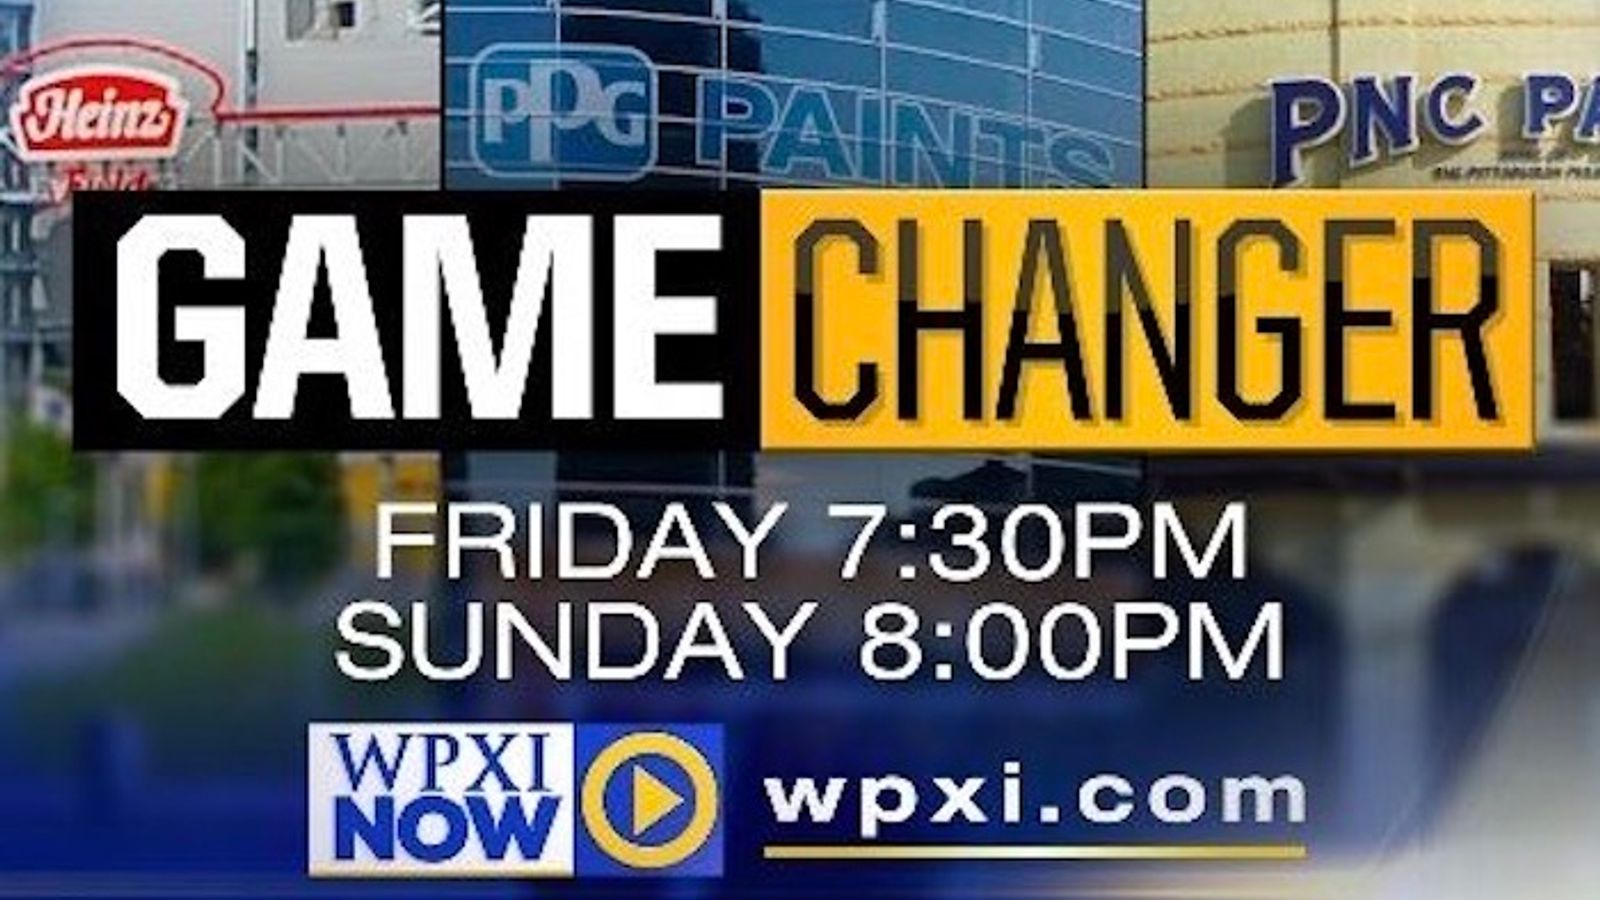 TV: DK on WPXI documentary 'Game Changer